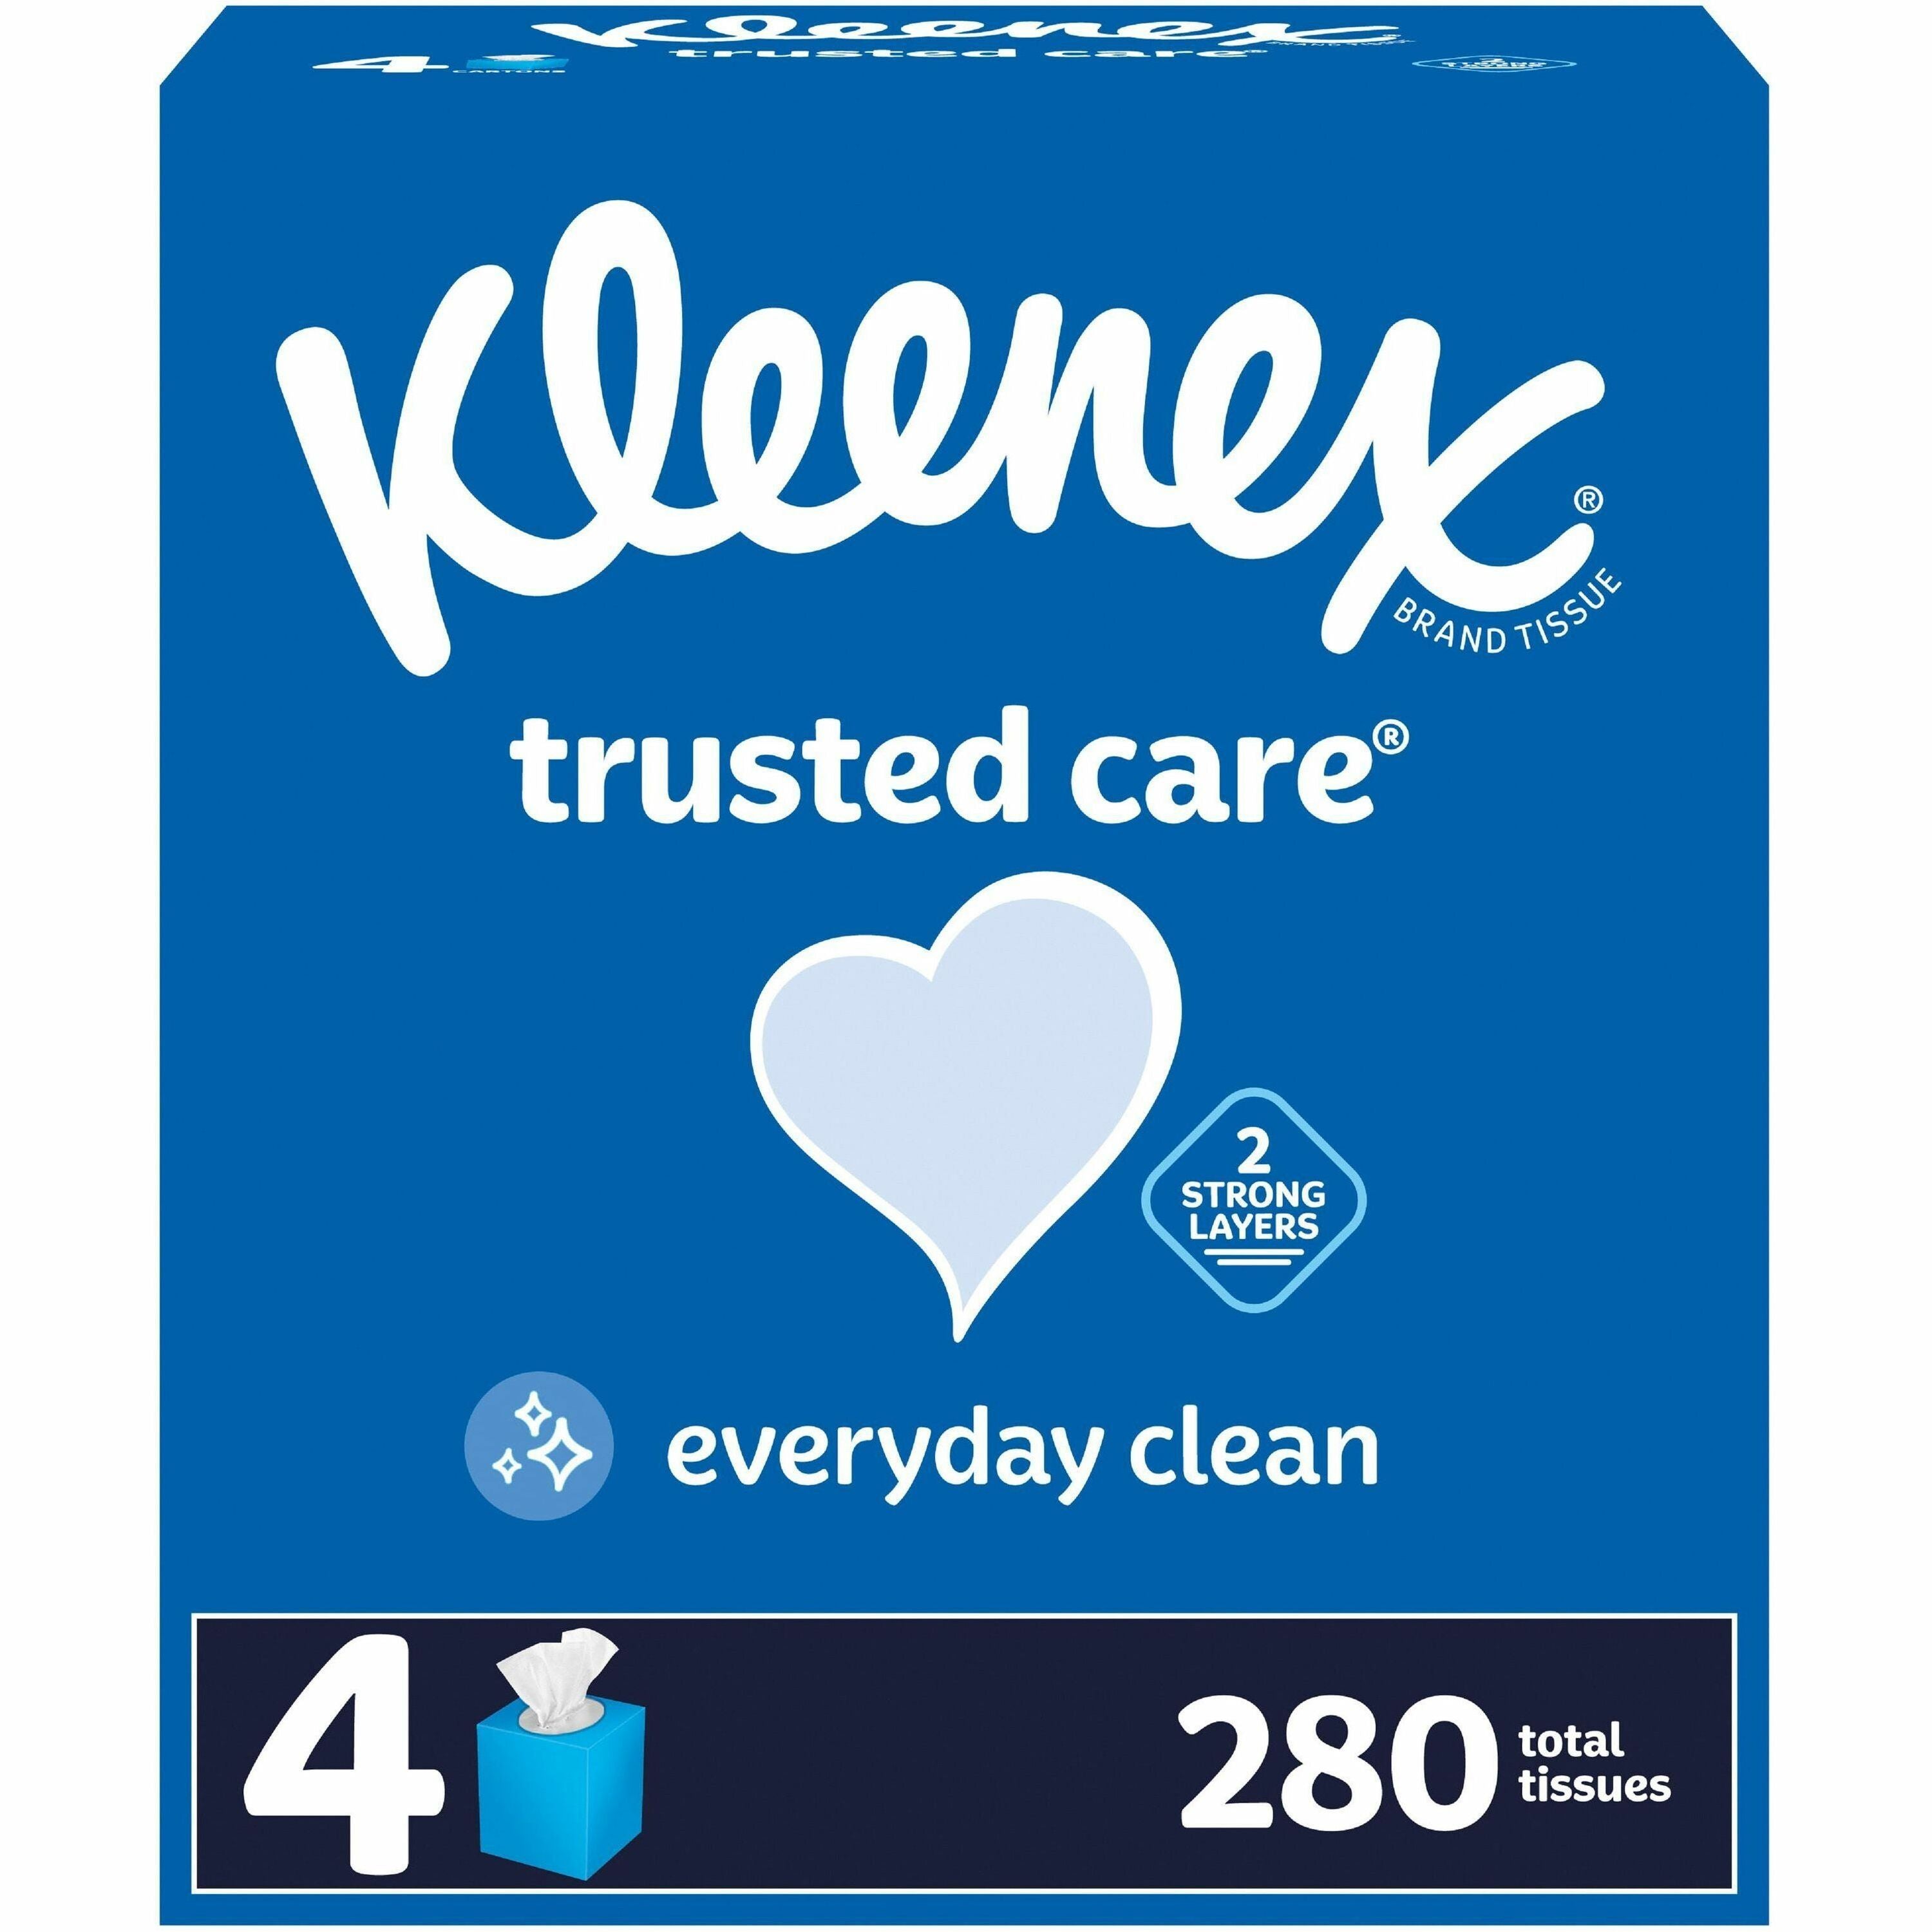 kleenex-trusted-care-tissues-2-ply-820-x-840-white-soft-strong-absorbent-durable-for-home-office-school-70-per-box-4-pack_kcc50184 - 1